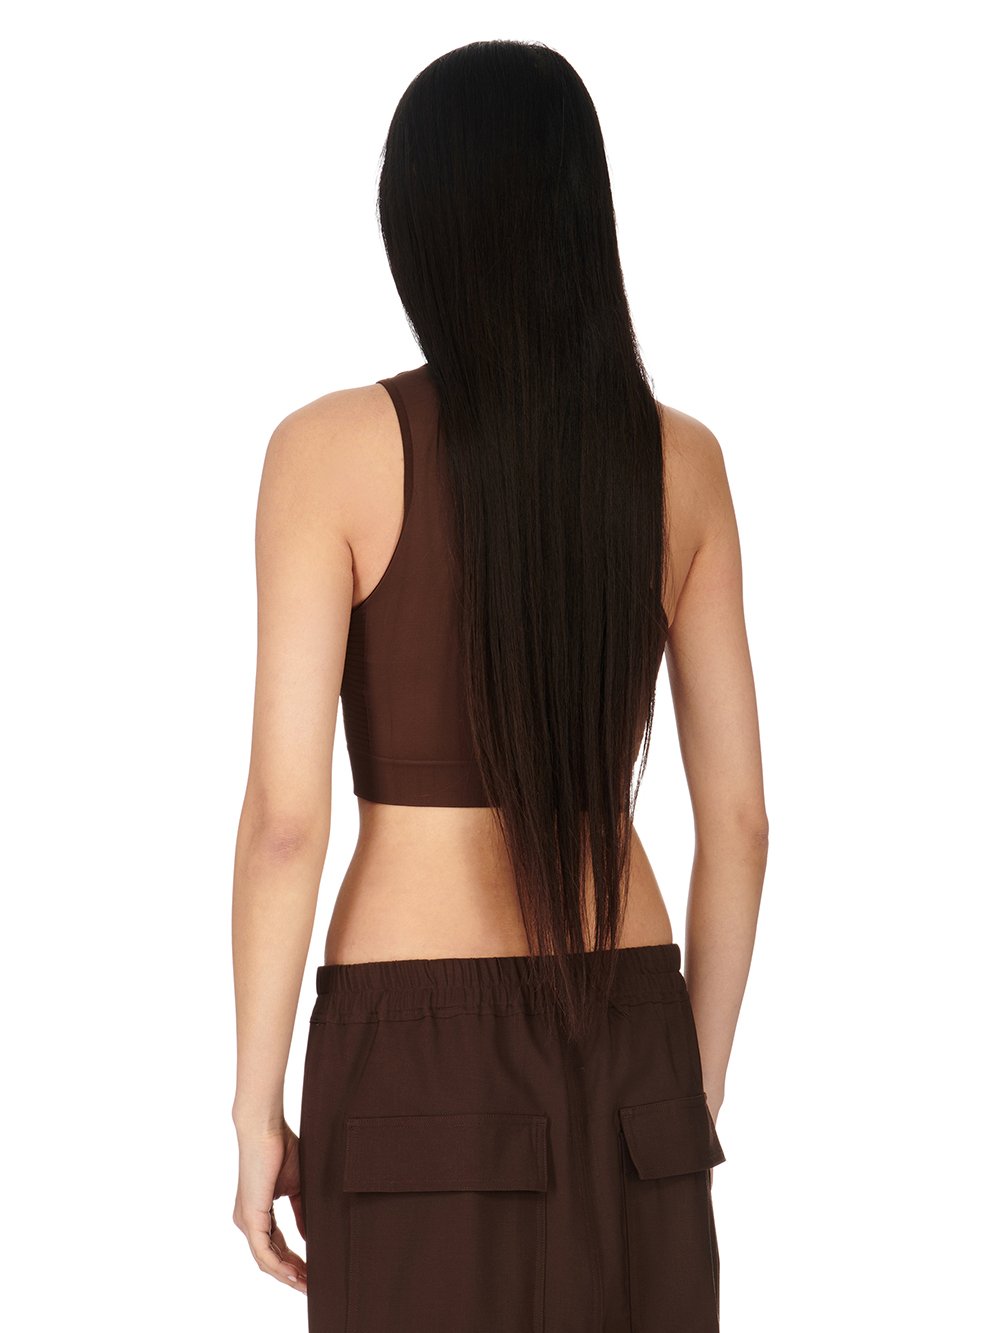 RICK OWENS FW23 LUXOR ATHENA BRA IN BROWN ACTIVE KNIT